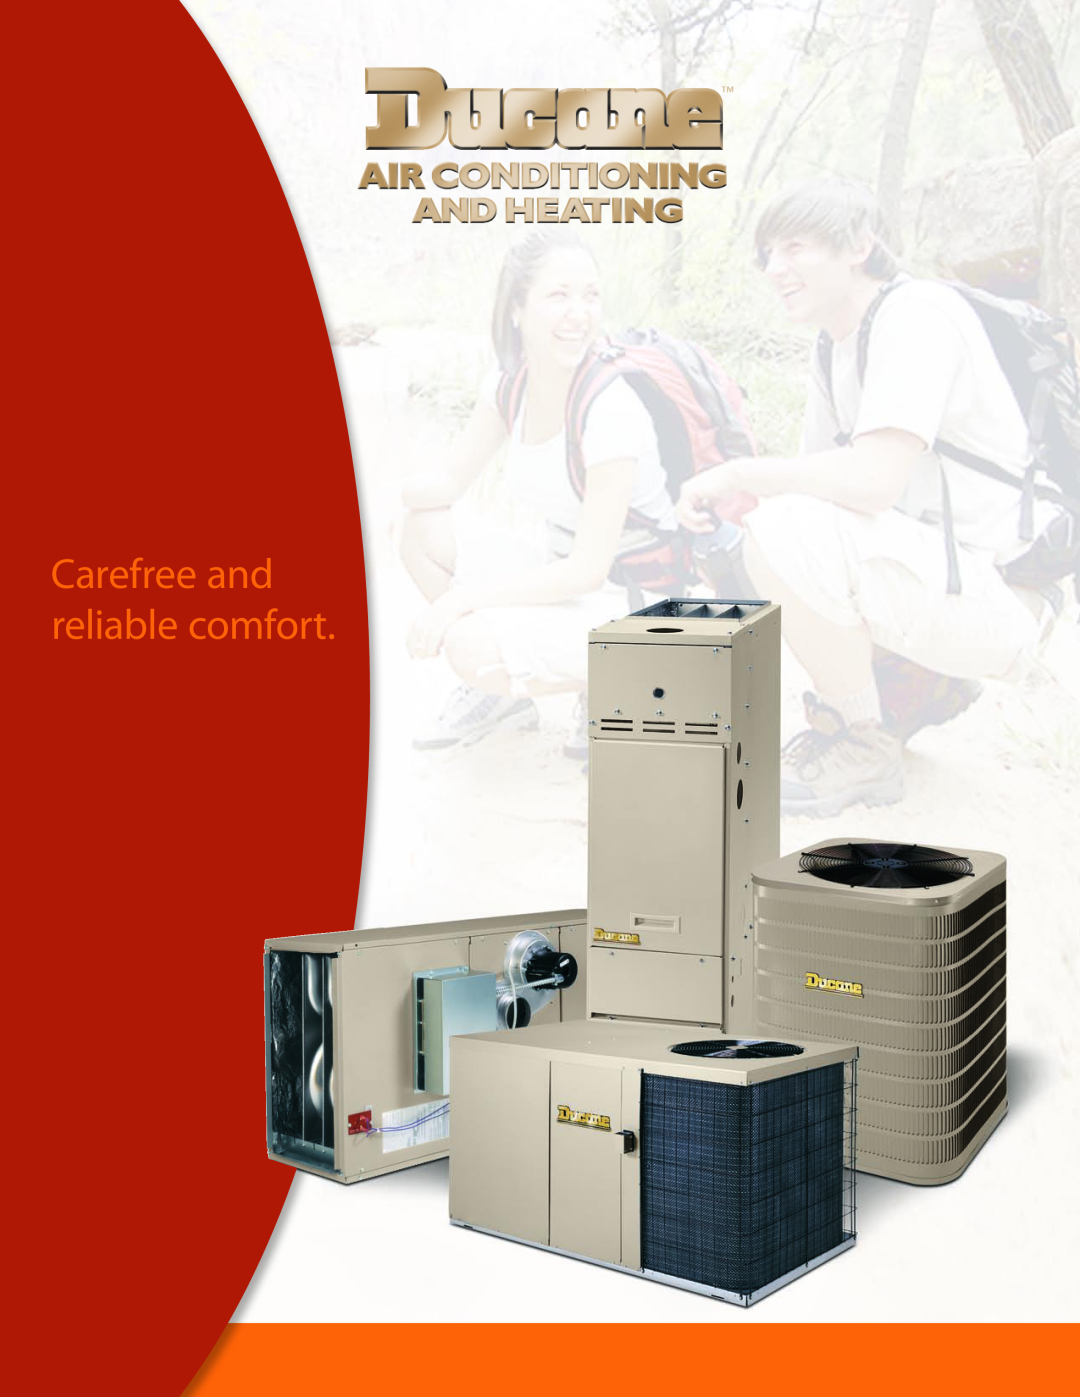 Ducane (HVAC) Air Conditioning and Heating manual Carefree and reliable comfort 